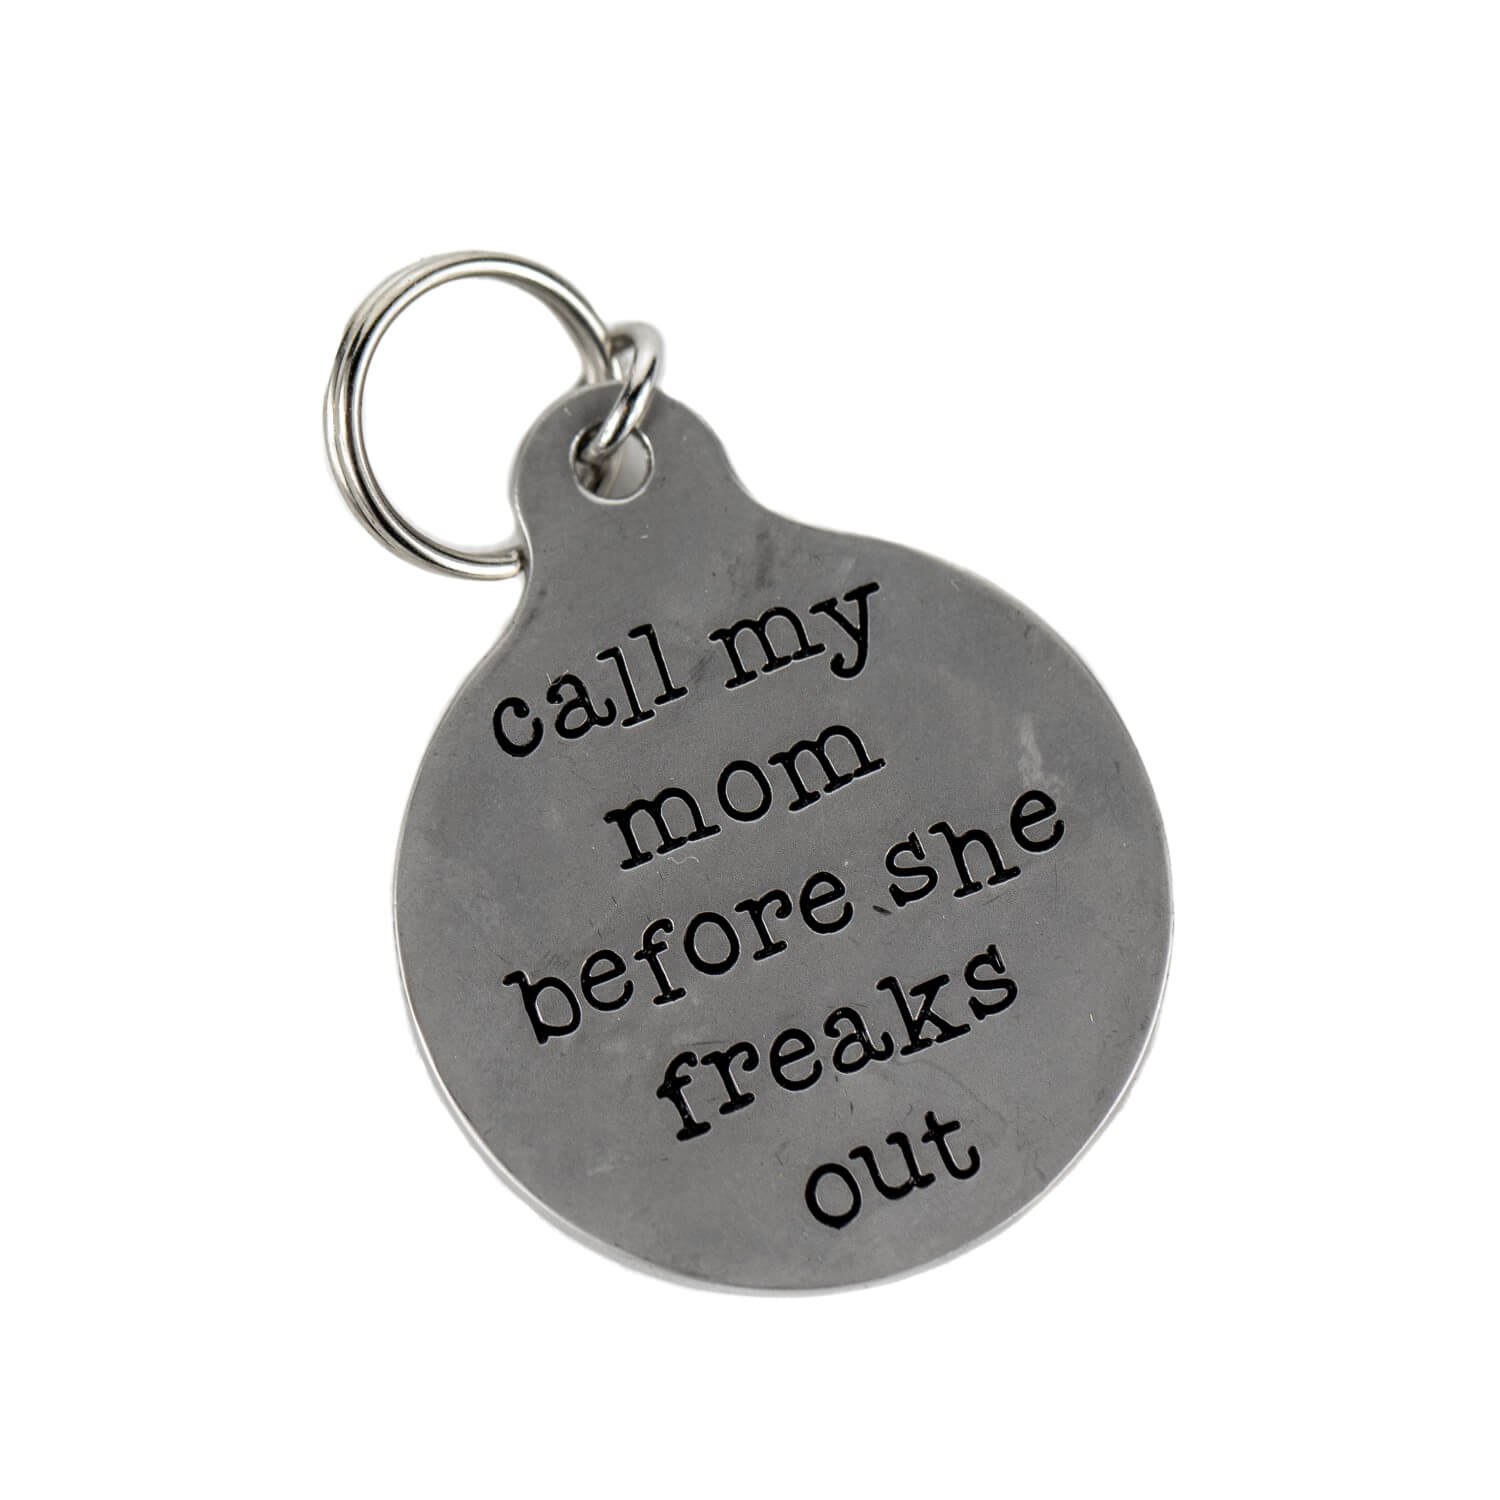 "Call my mom before she freaks out" Funny Quote Pet Tags.